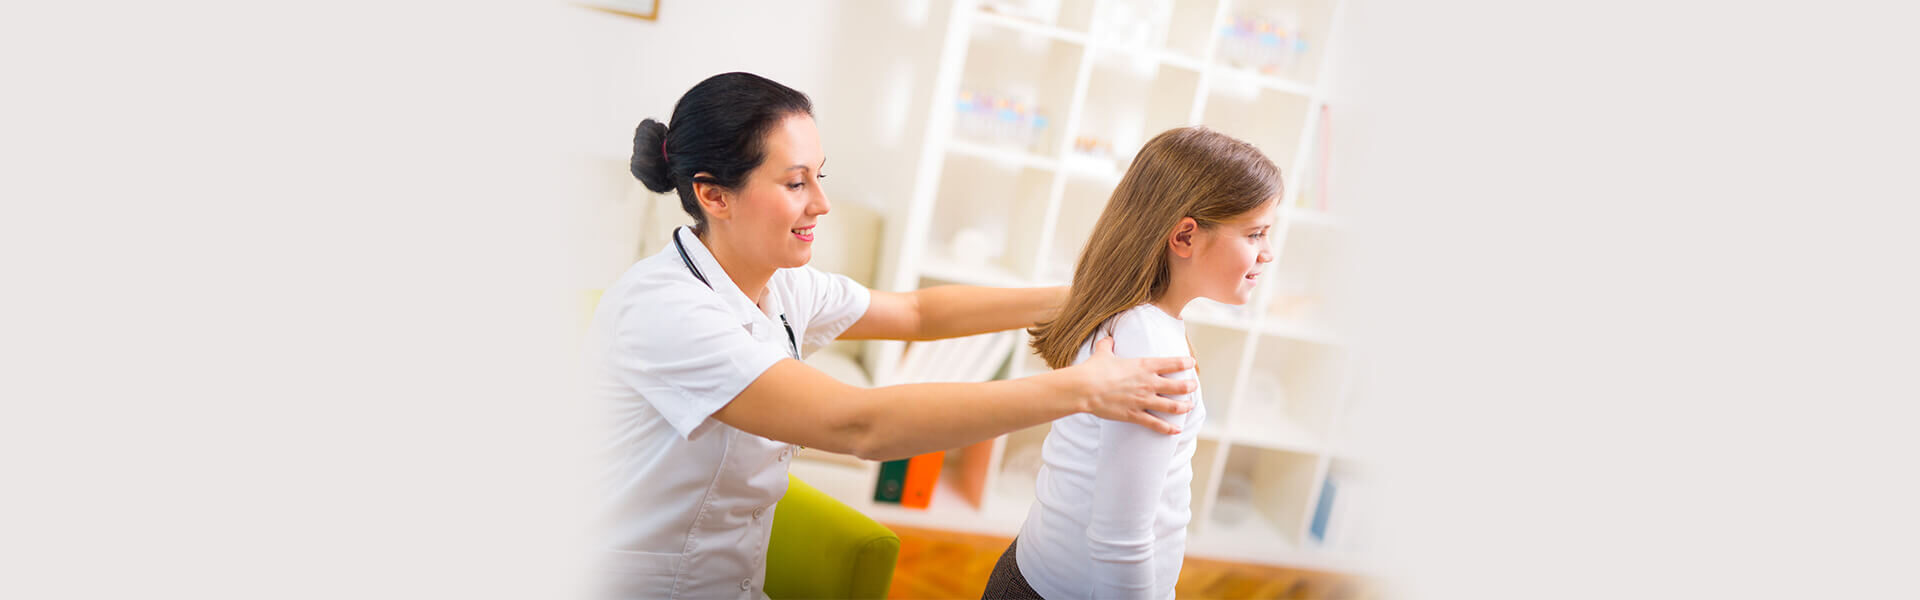 Pediatric Chiropractic Services Near You